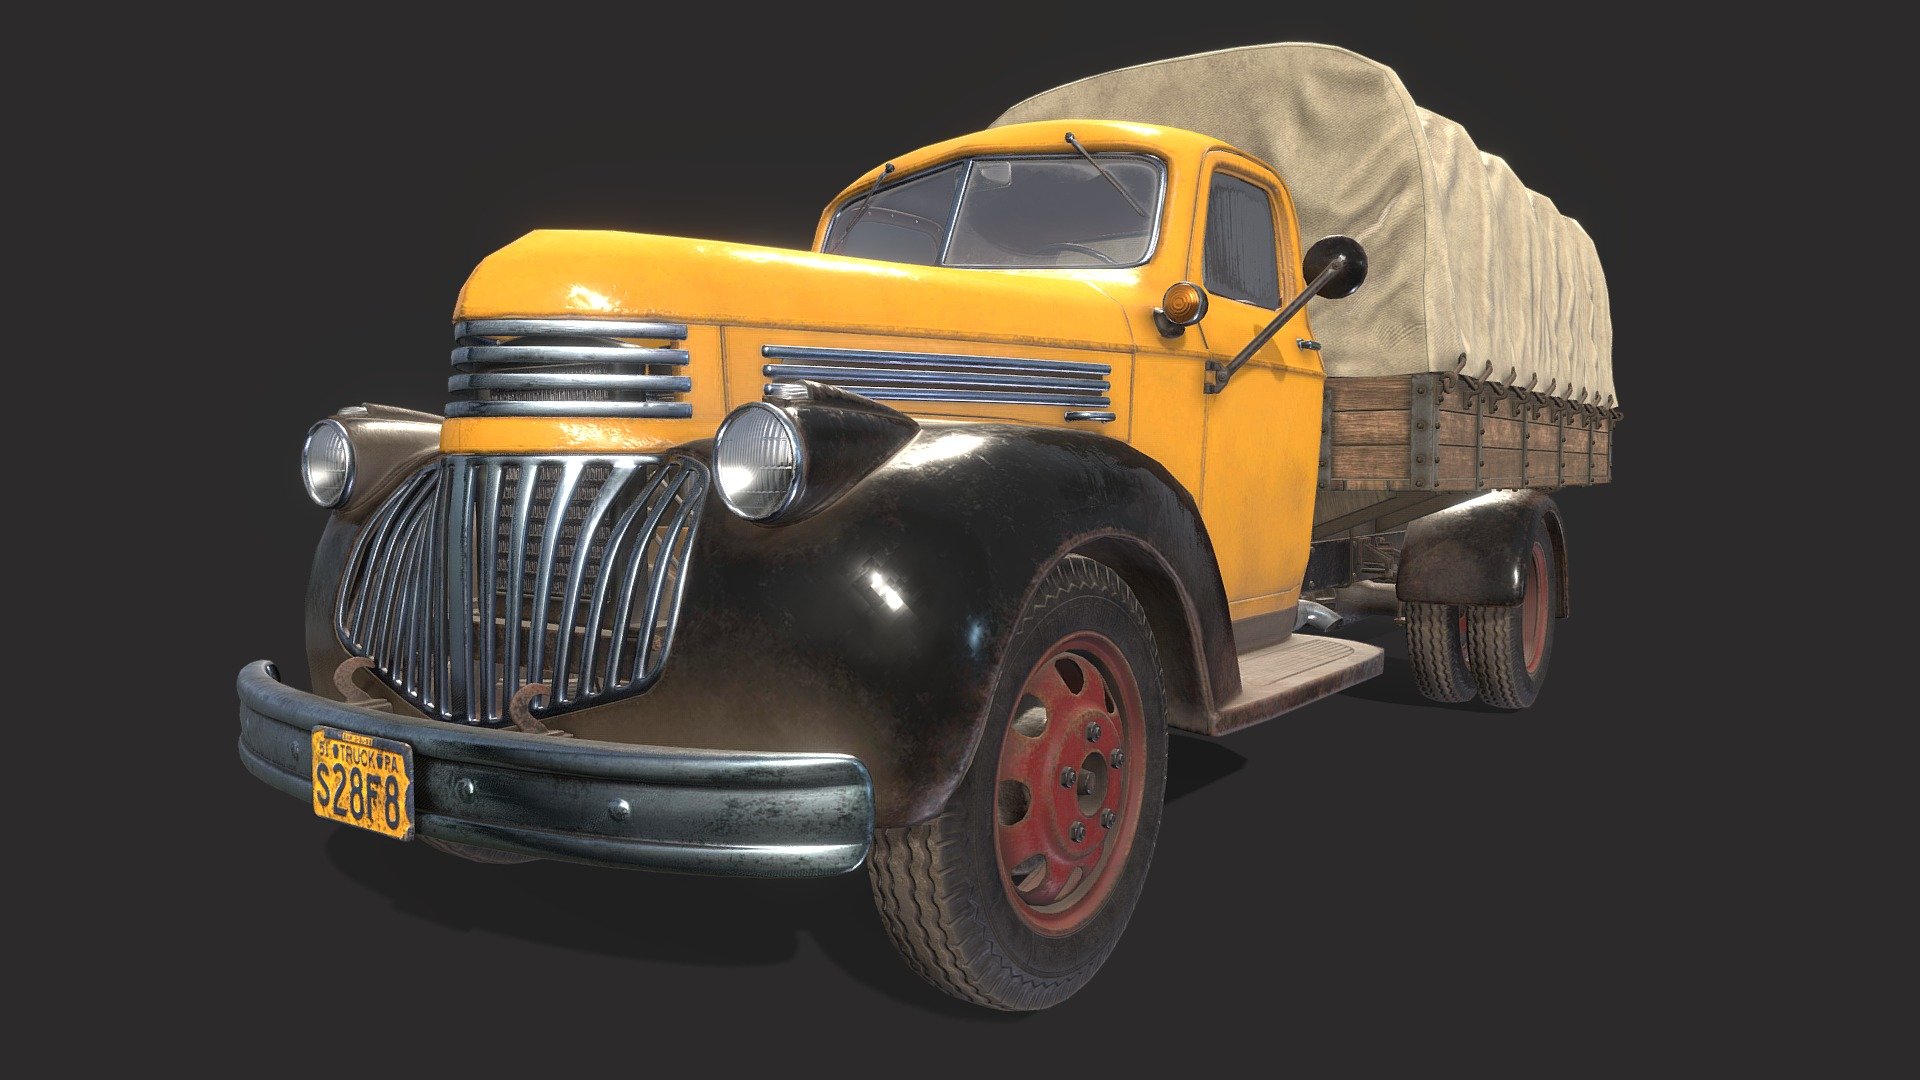 Old game ready truck, inspired by 1940-s GMC kinda stuff. Contains chassis, engine, interior etc., and 6 texture sets for wheels, cab, bed, chassis, glass objects and interior. Modelled in Maya, baked and textured in Substance Painter and cloth cover simulated in MD. 

Check out more renders on the Atstation:

https://www.artstation.com/artwork/39Ew5g

Thank you! - Old Chevy Truck - 3D model by Nick Samarin (@NickSamarin) 3d model